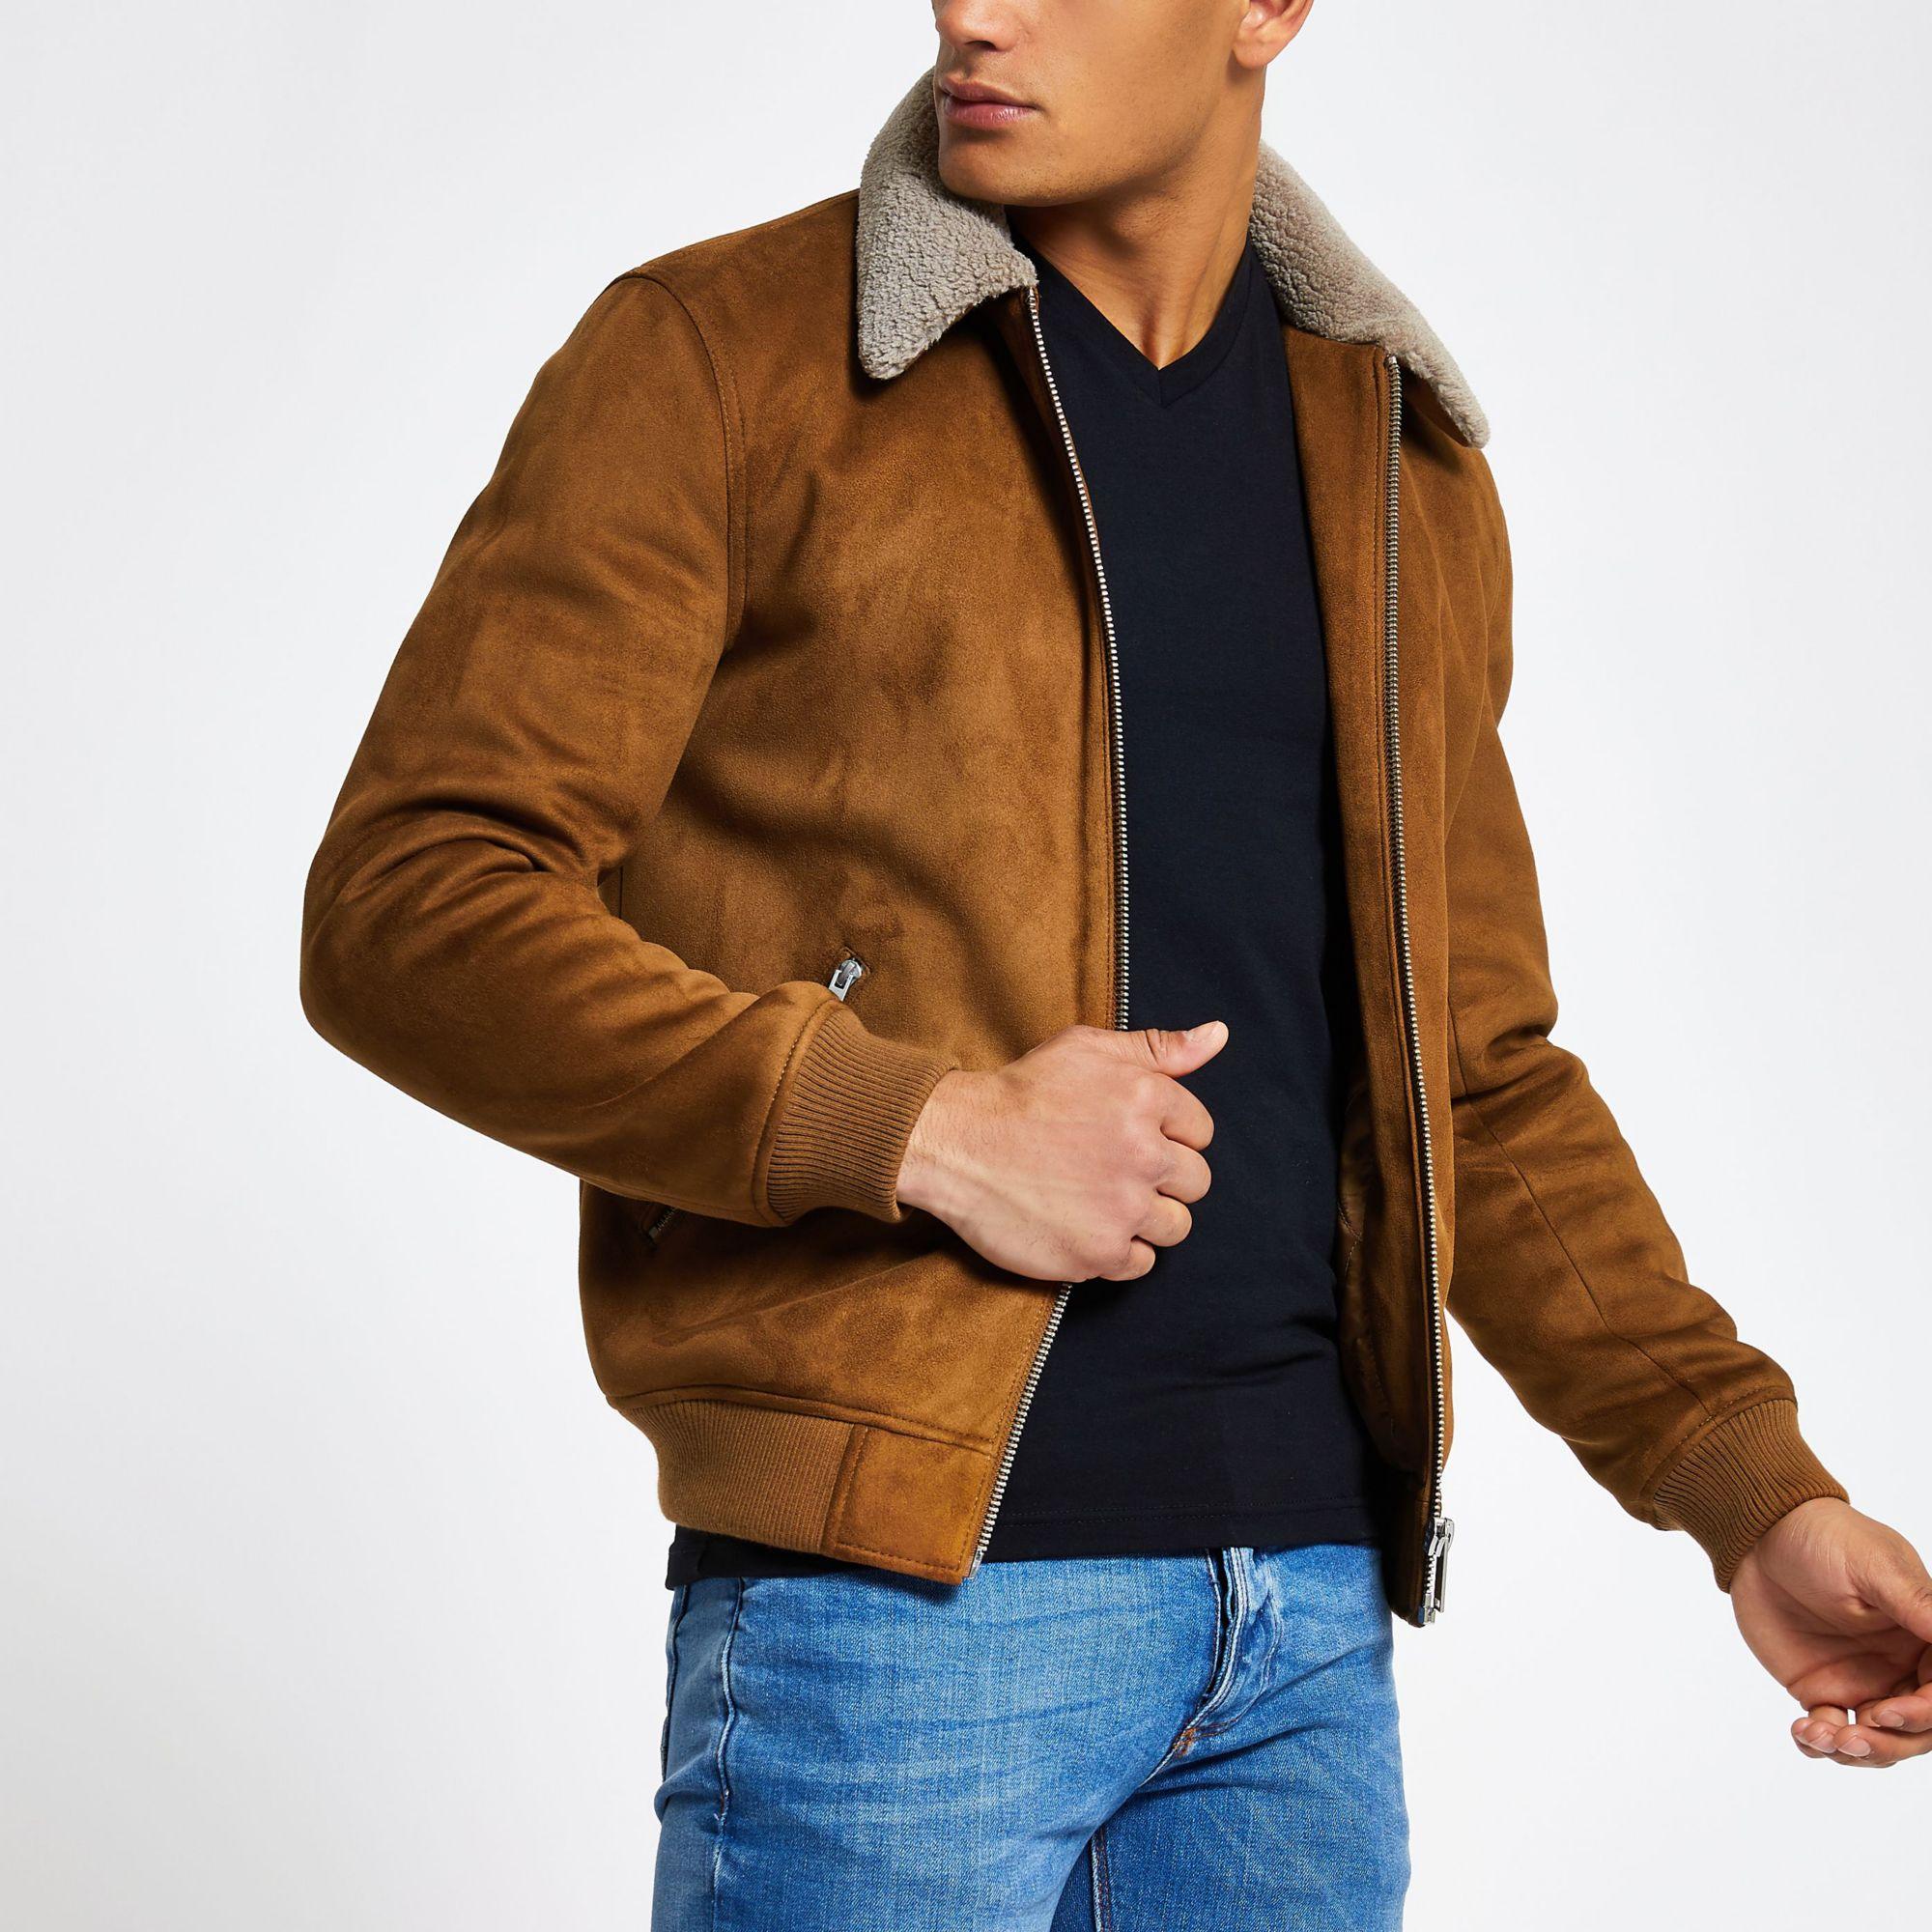 River Island Light Faux Suede Borg Collar Jacket in Brown for Men - Lyst